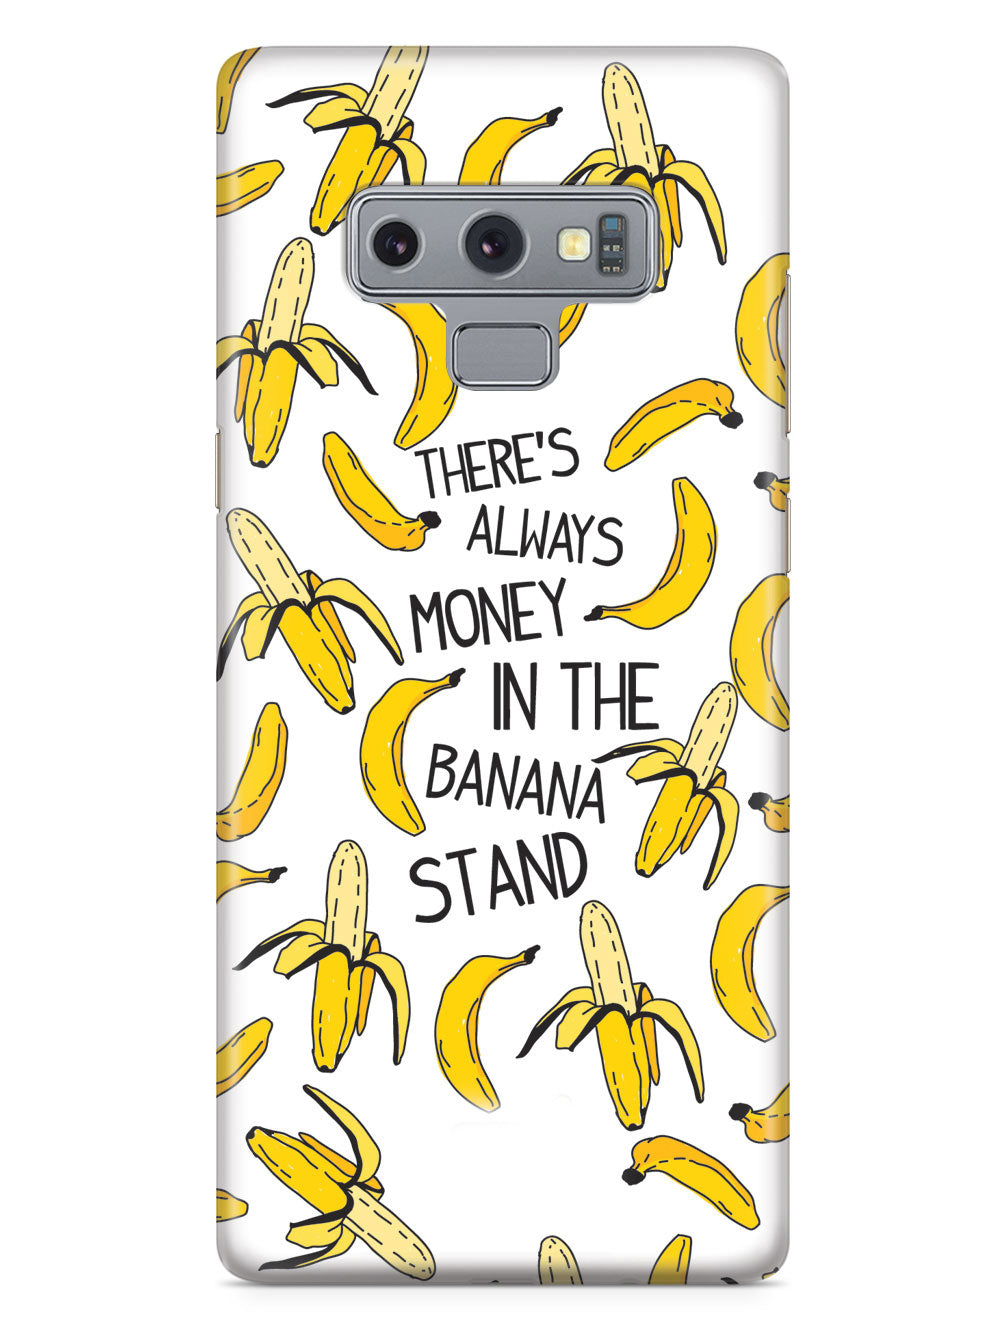 There's Always Money in the Banana Stand Case